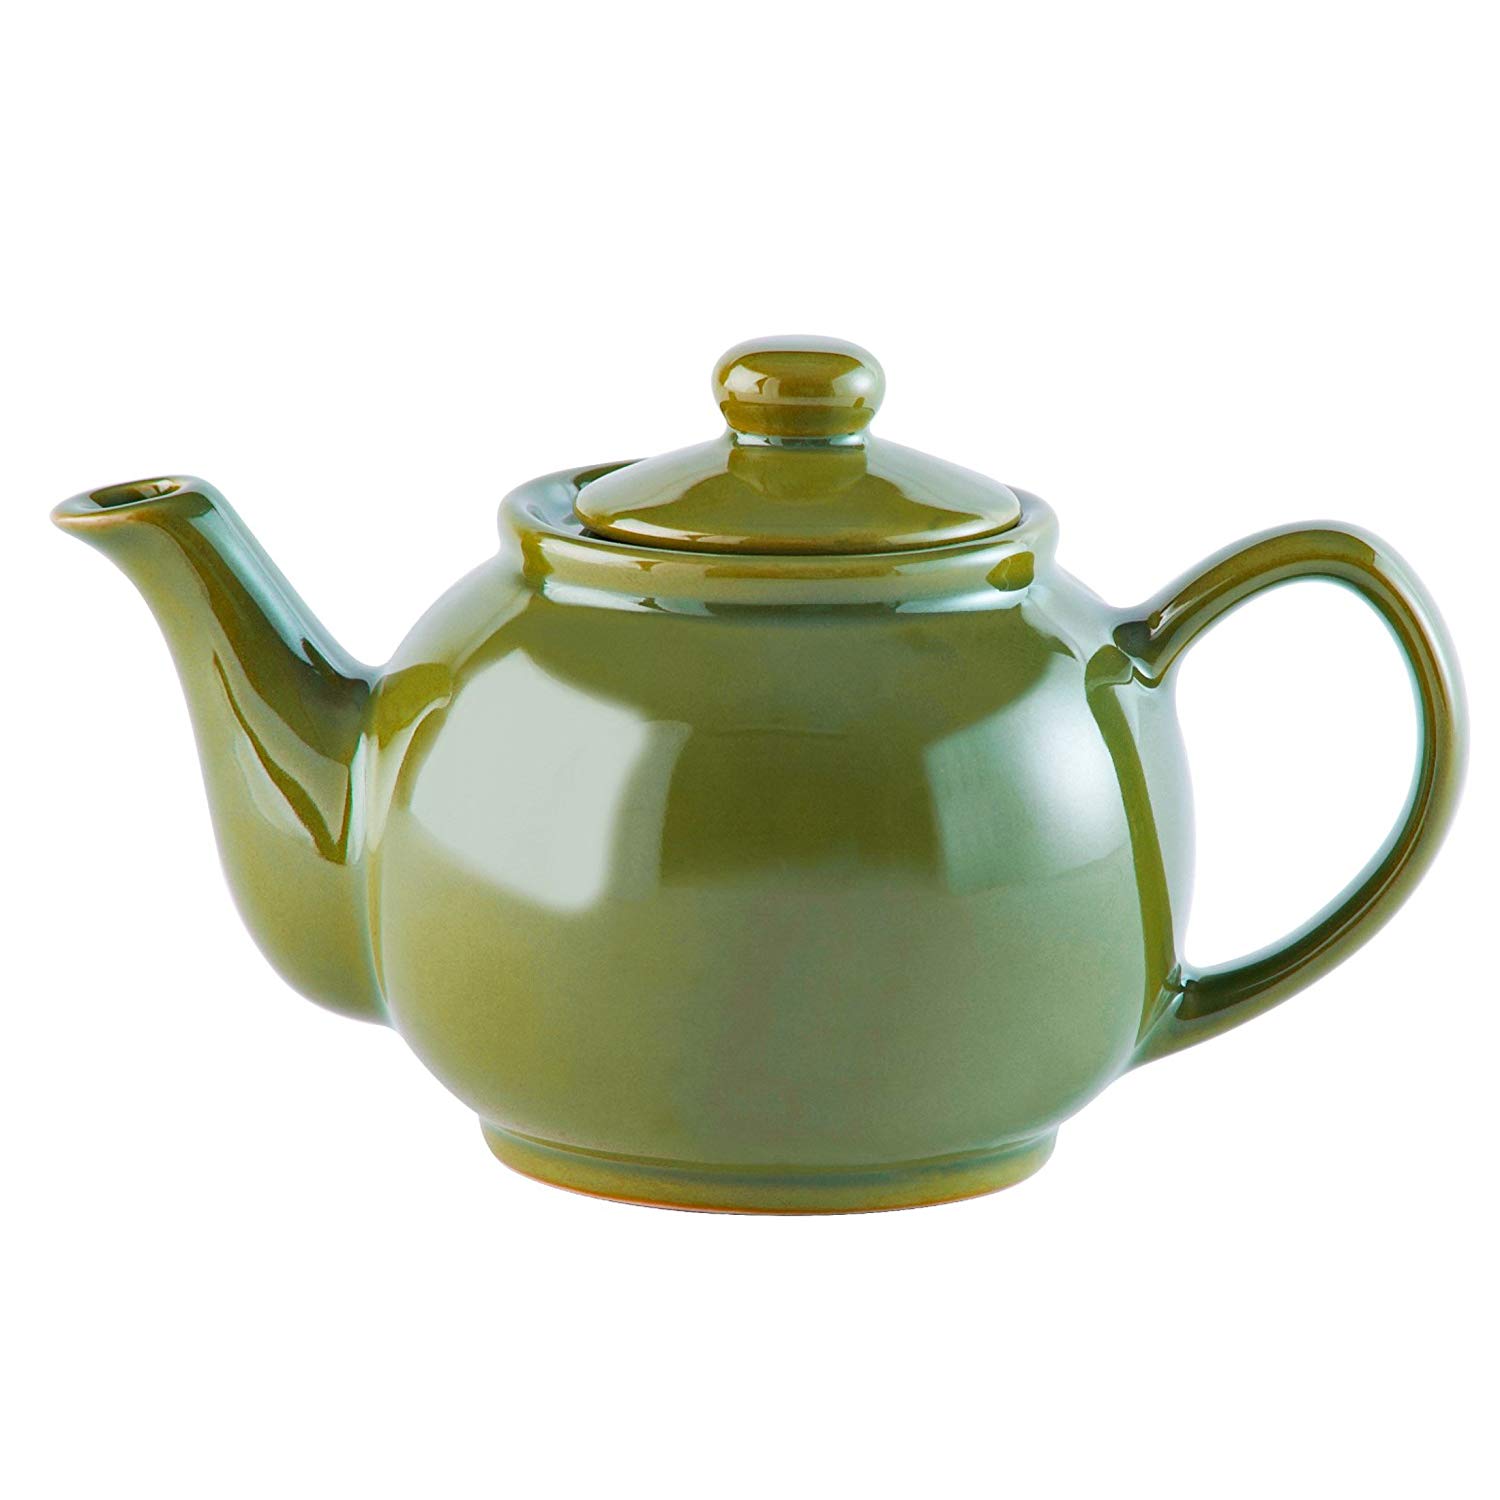 Price & Kensington Teapot With Lid – Colour: Olive Green – Typical English 